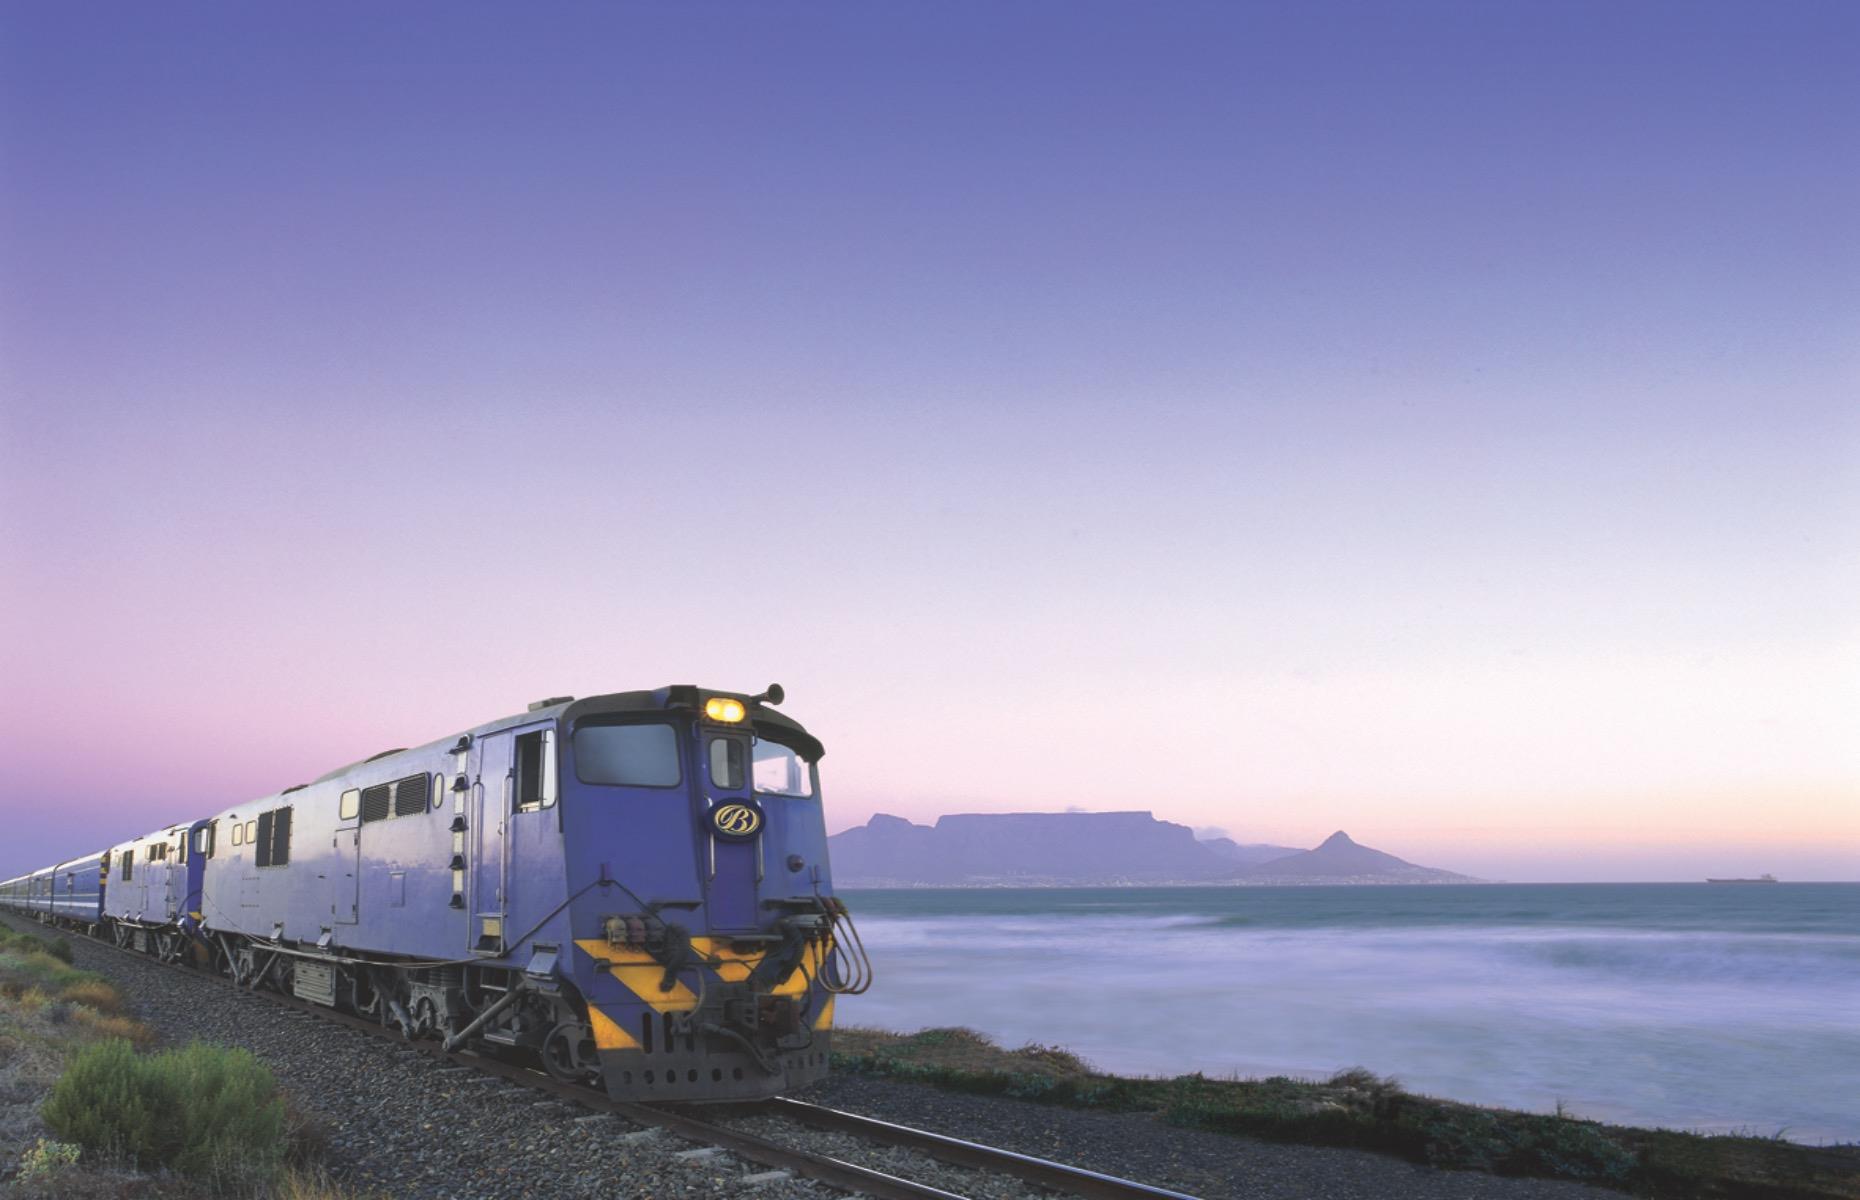 <p>Taking passengers back to the heyday of the 1920s, <a href="http://www.bluetrain.co.za">The Blue Train</a> is steeped in nostalgia, with many kings and presidents having joined its illustrious guest list. This hotel on wheels takes guests on a two-day route between Cape Town and Pretoria (one that’s been traversed for decades) and new destinations have been added in recent years, including the iconic Victoria Falls, famed Garden Route and Kruger National Park where guests can take safari excursions.</p>  <p><a href="https://www.loveexploring.com/galleries/73536/americas-most-incredible-train-journeys?page=1"><strong>These are America's most beautiful train journeys</strong></a></p>